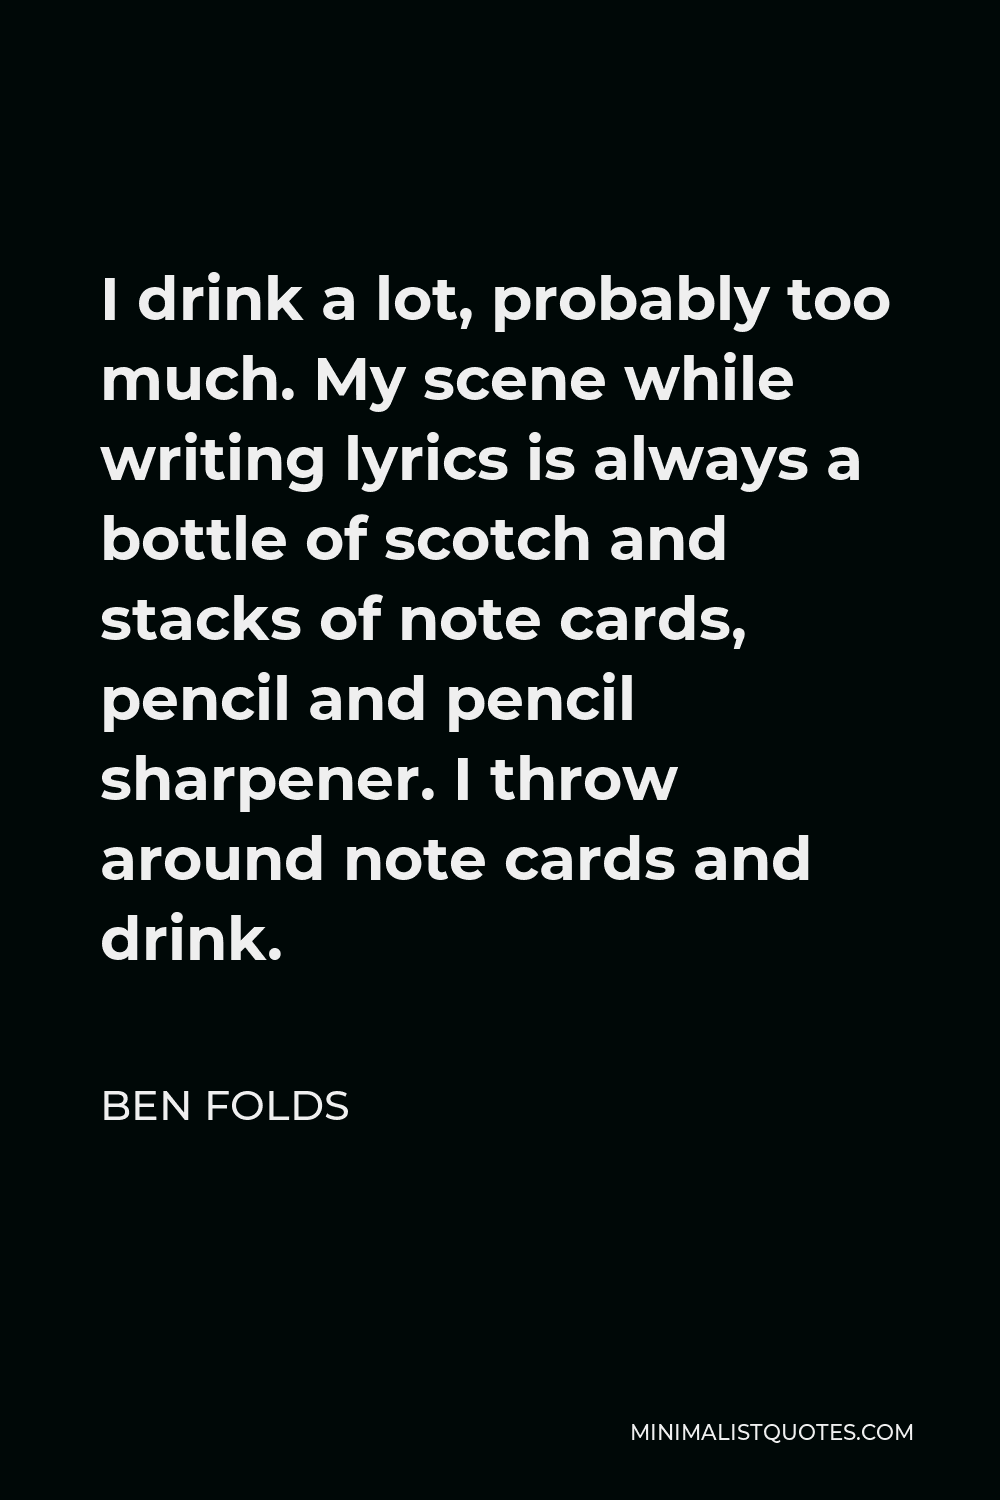 Ben Folds Quote - I drink a lot, probably too much. My scene while writing lyrics is always a bottle of scotch and stacks of note cards, pencil and pencil sharpener. I throw around note cards and drink.